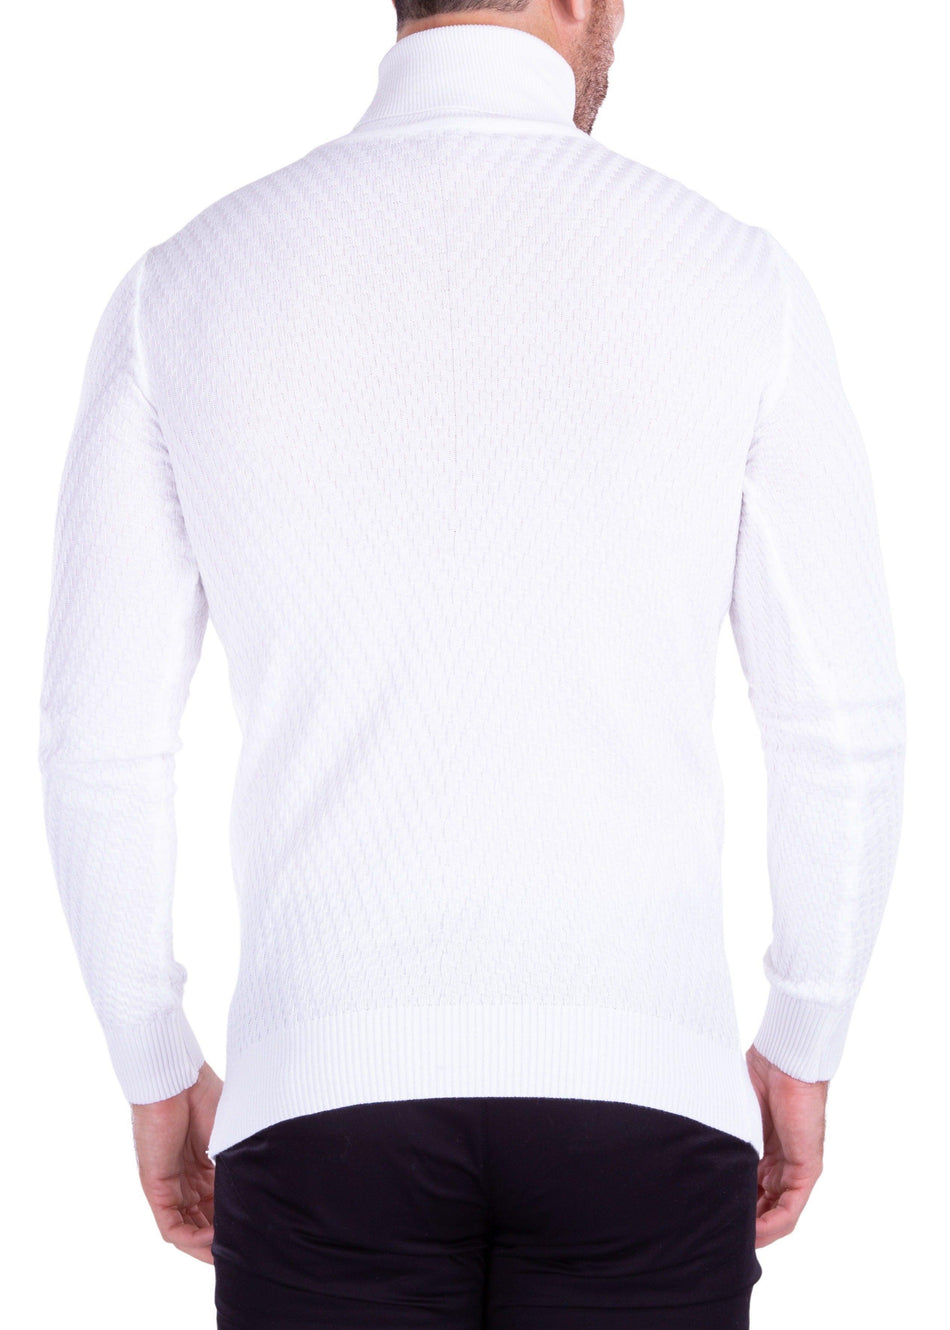 Textured Turtleneck Sweater White Men's Solid Color Knit Wool Cotton Bespoke Moda by NEO NYC